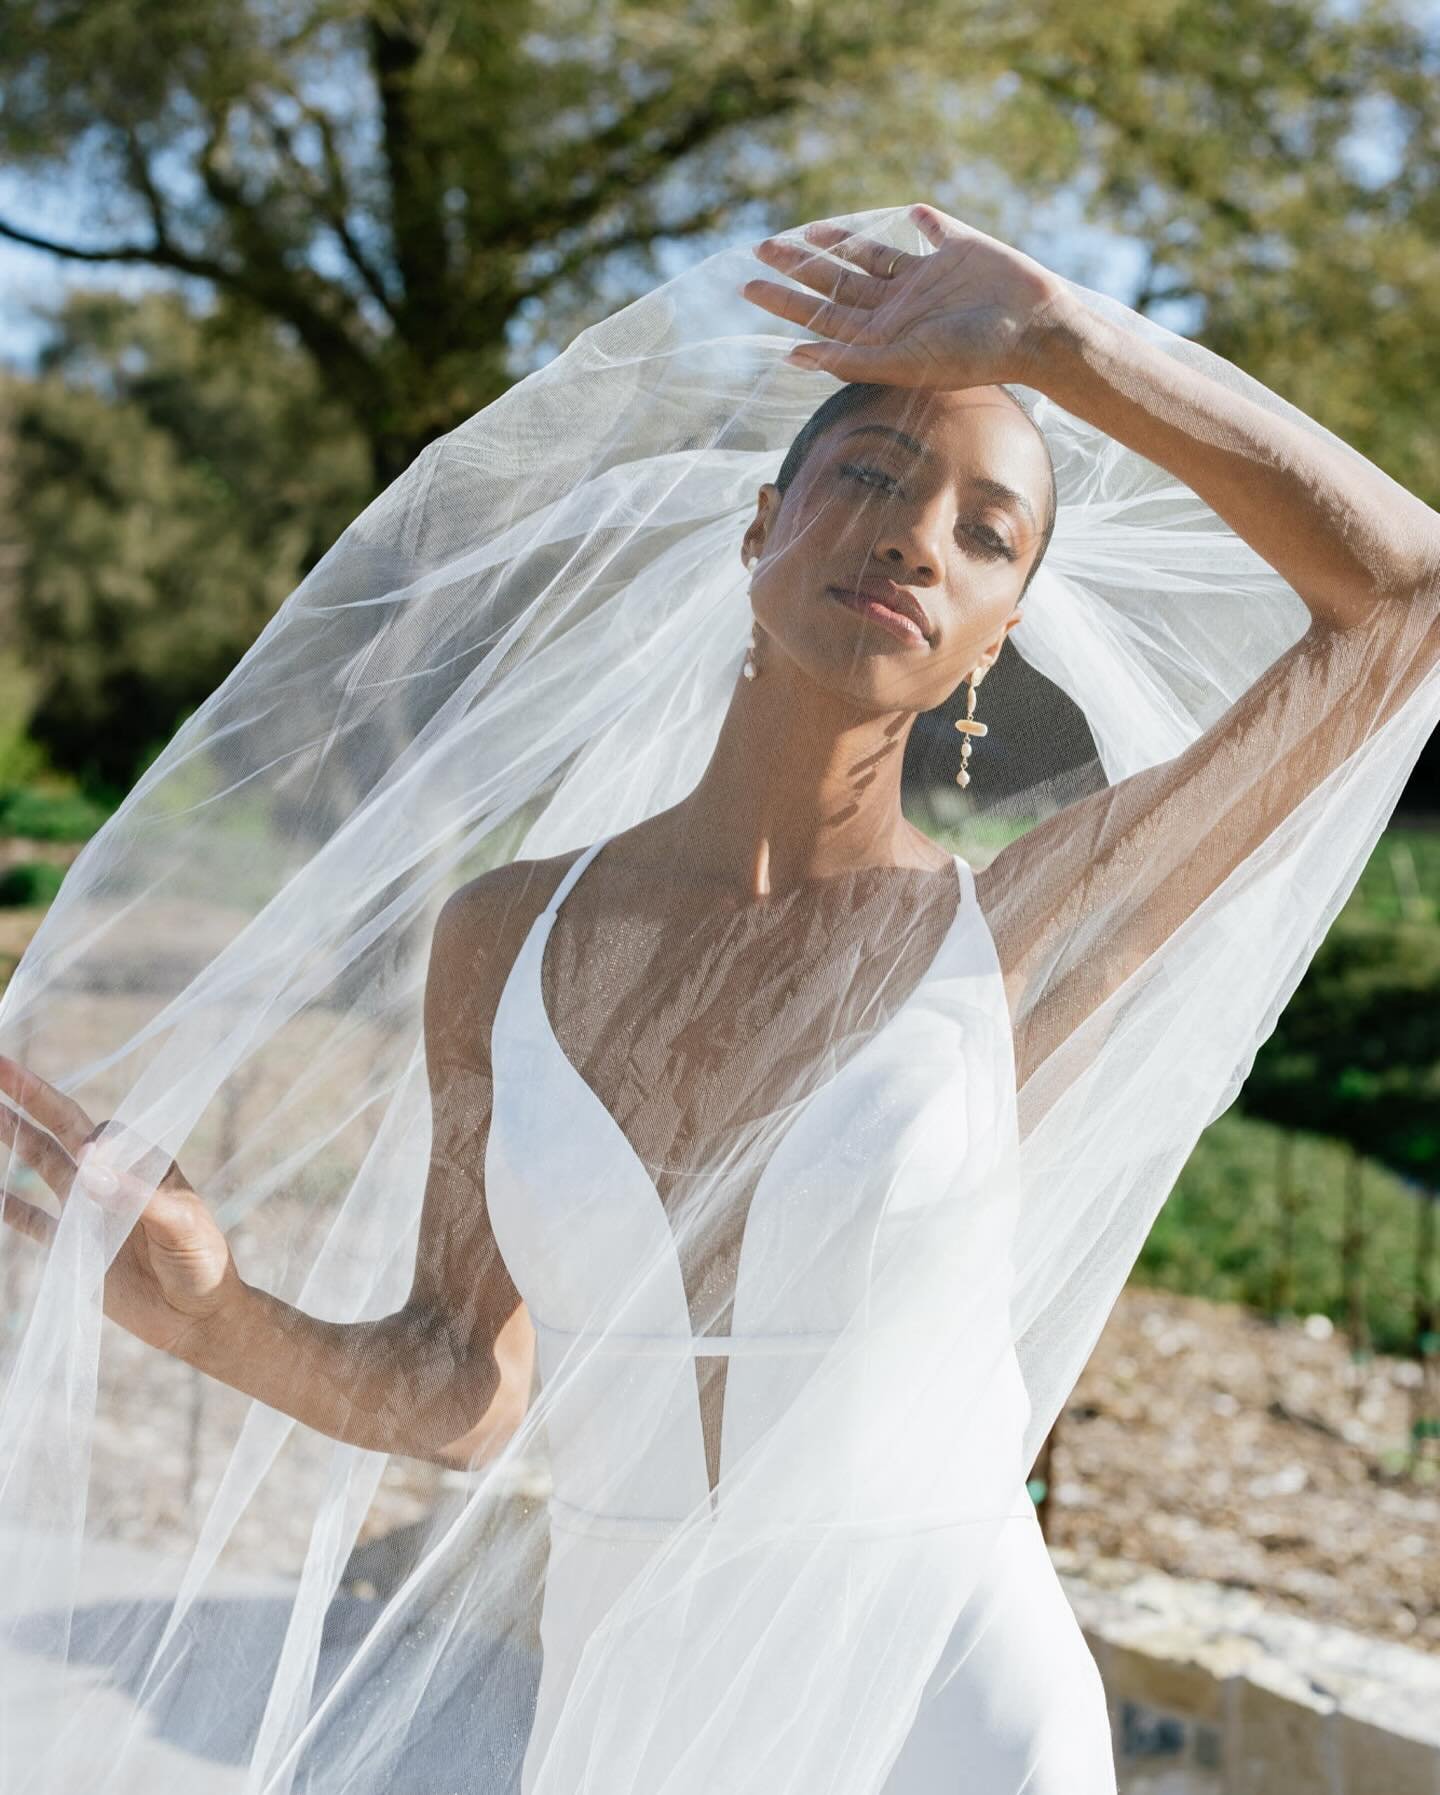 Meet Me at Monserate 🤍 Excited to finally share images from the bridal editorial shoot I put together last month at the Tuscan Estate at Monserate Winery featuring dresses &amp; accessories from Casablanca Bridal&rsquo;s Le Blanc collection. So much